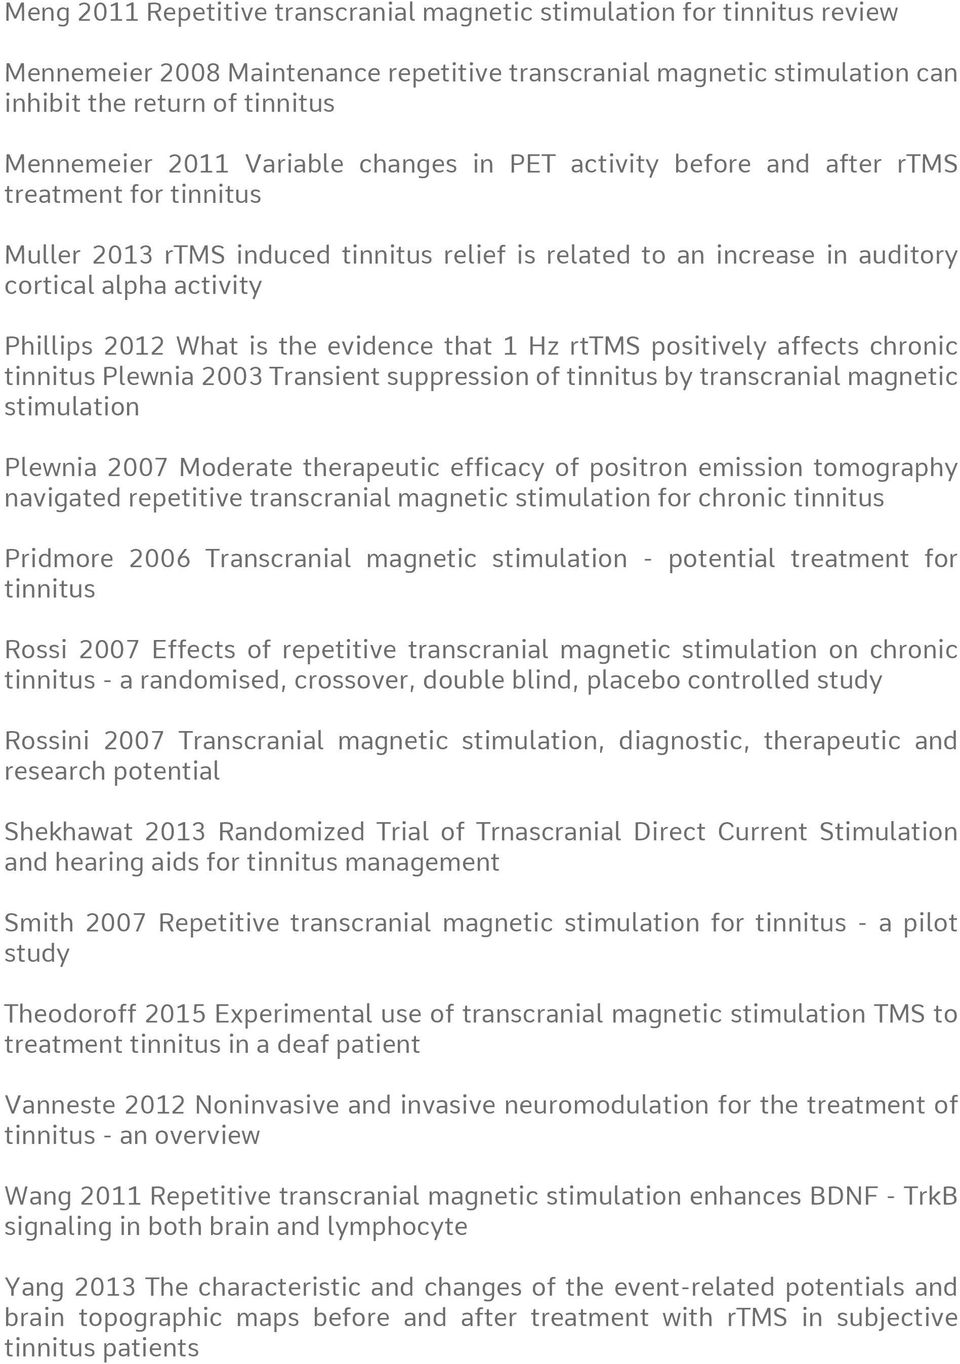 is the evidence that 1 Hz rttms positively affects chronic tinnitus Plewnia 2003 Transient suppression of tinnitus by transcranial magnetic stimulation Plewnia 2007 Moderate therapeutic efficacy of